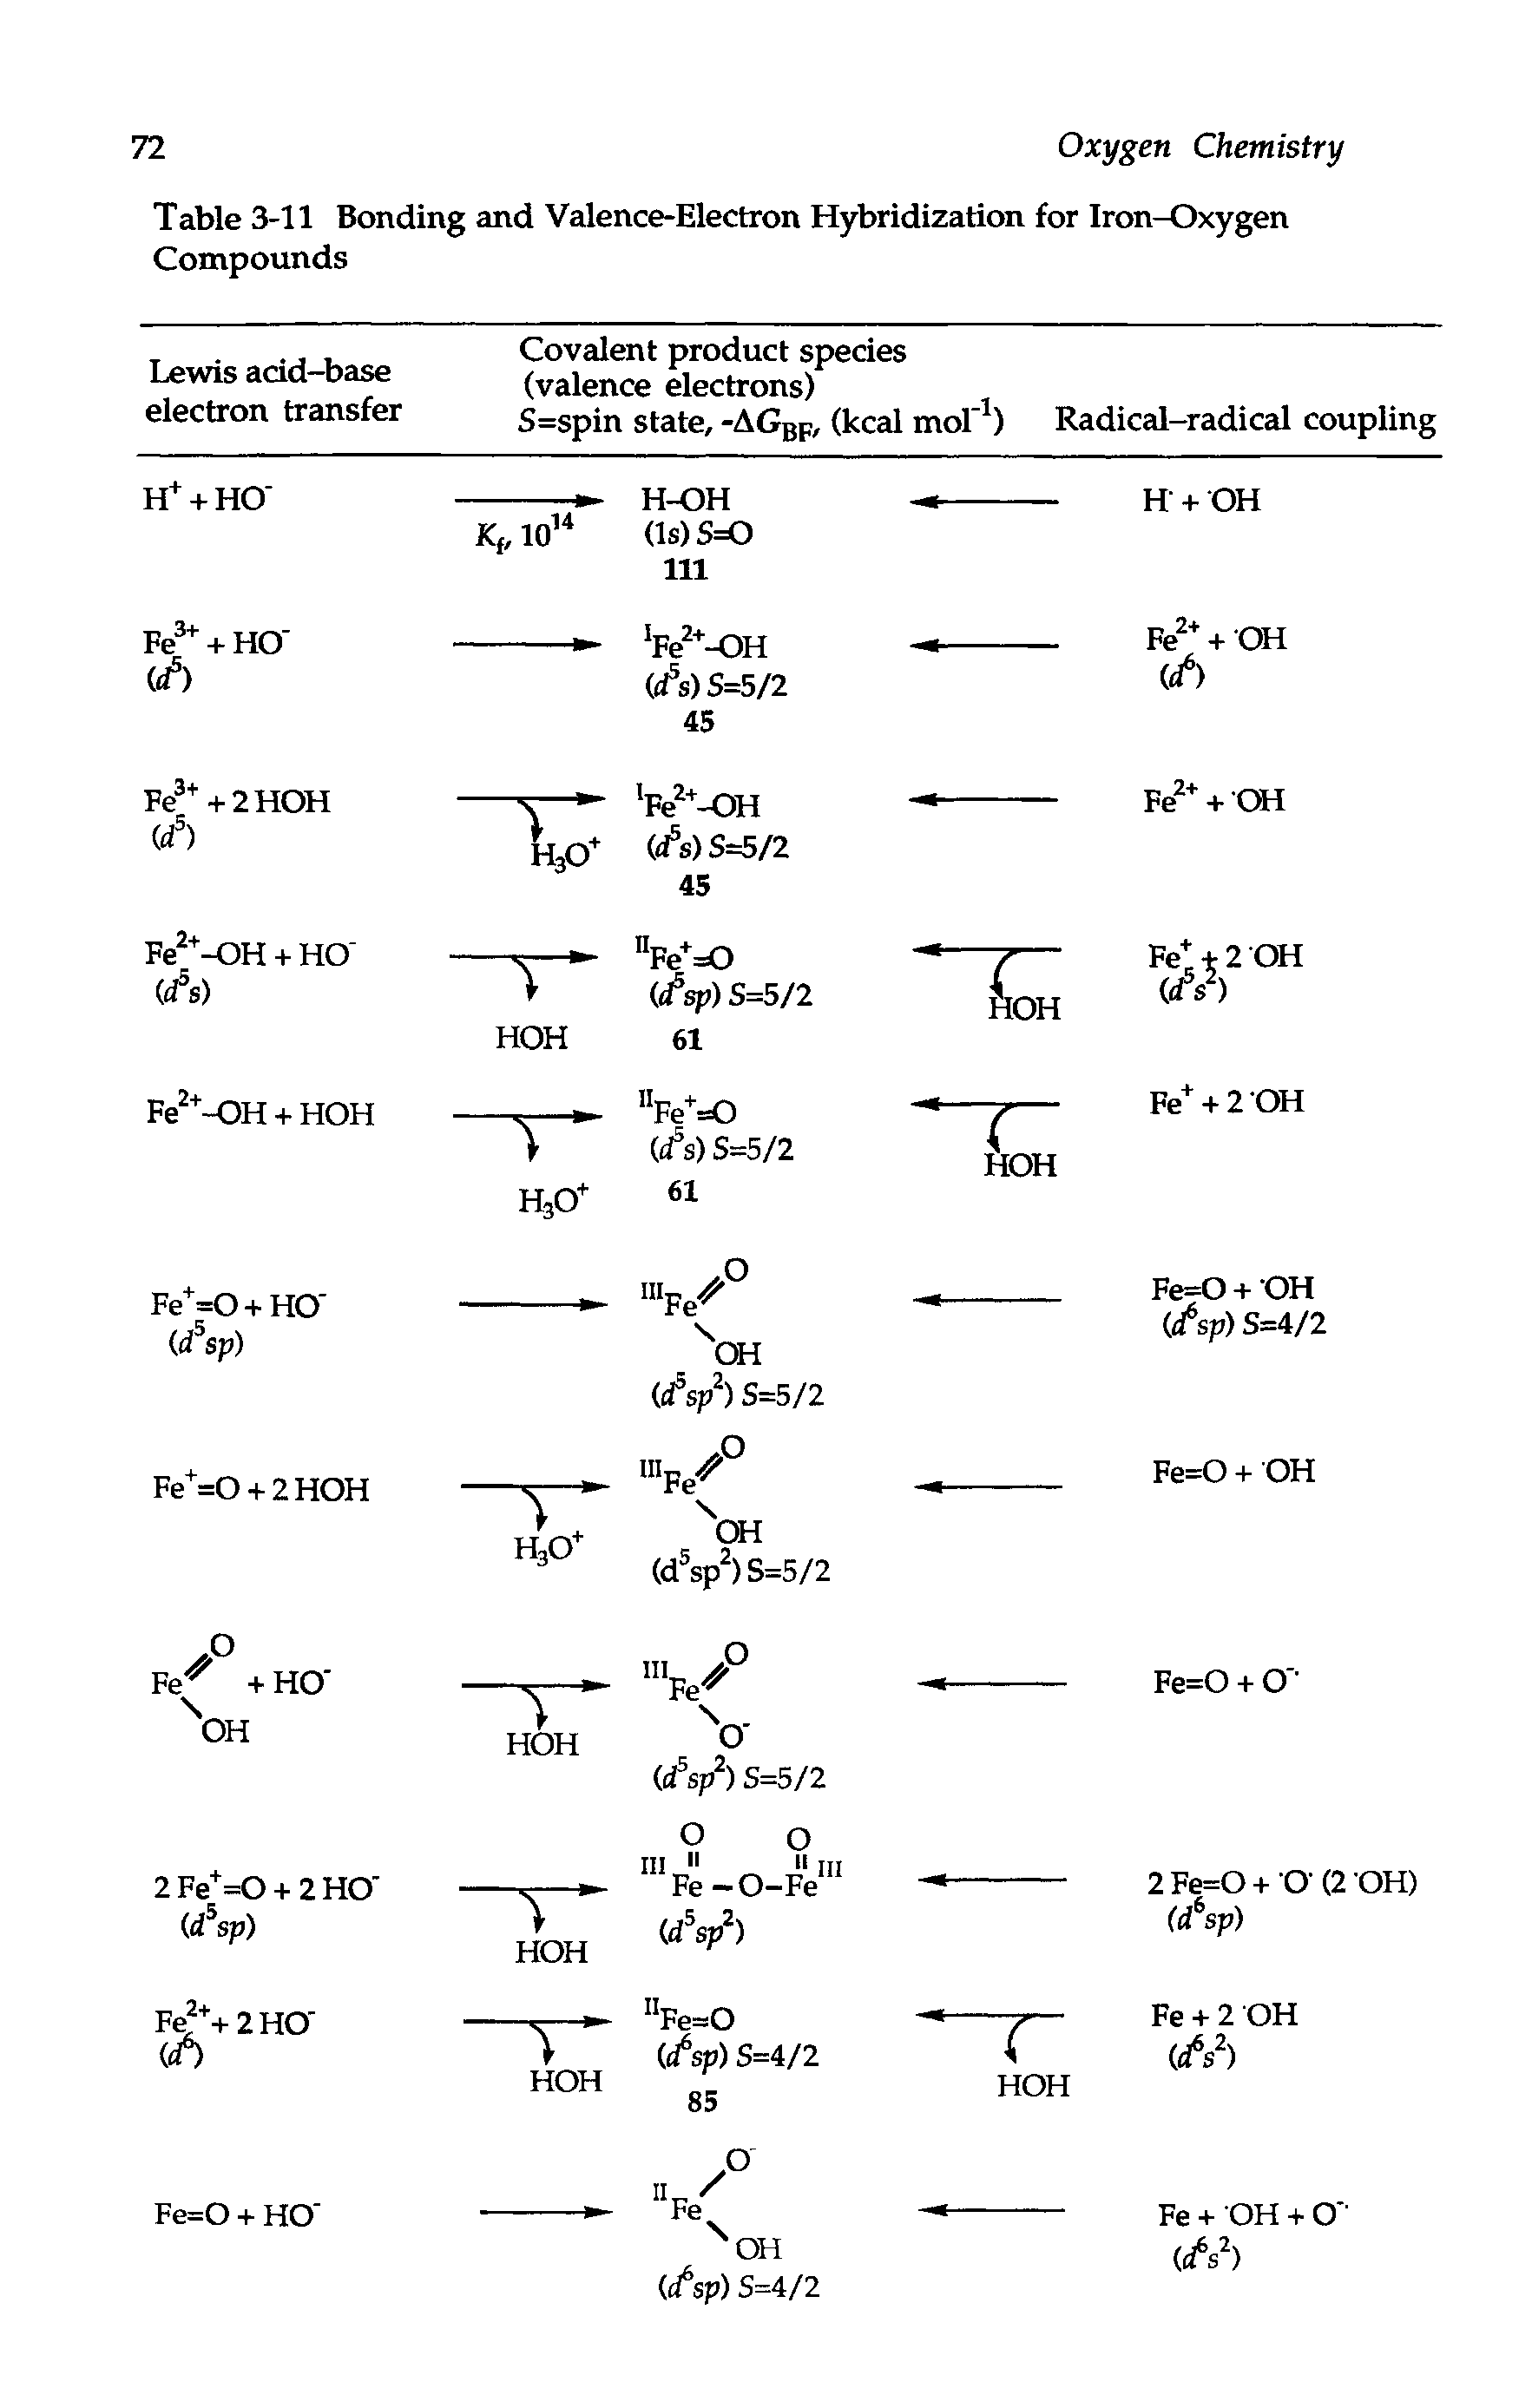 Table 3-11 Bonding and Valence-Electron Hybridization for Iron-Oxygen Compounds...